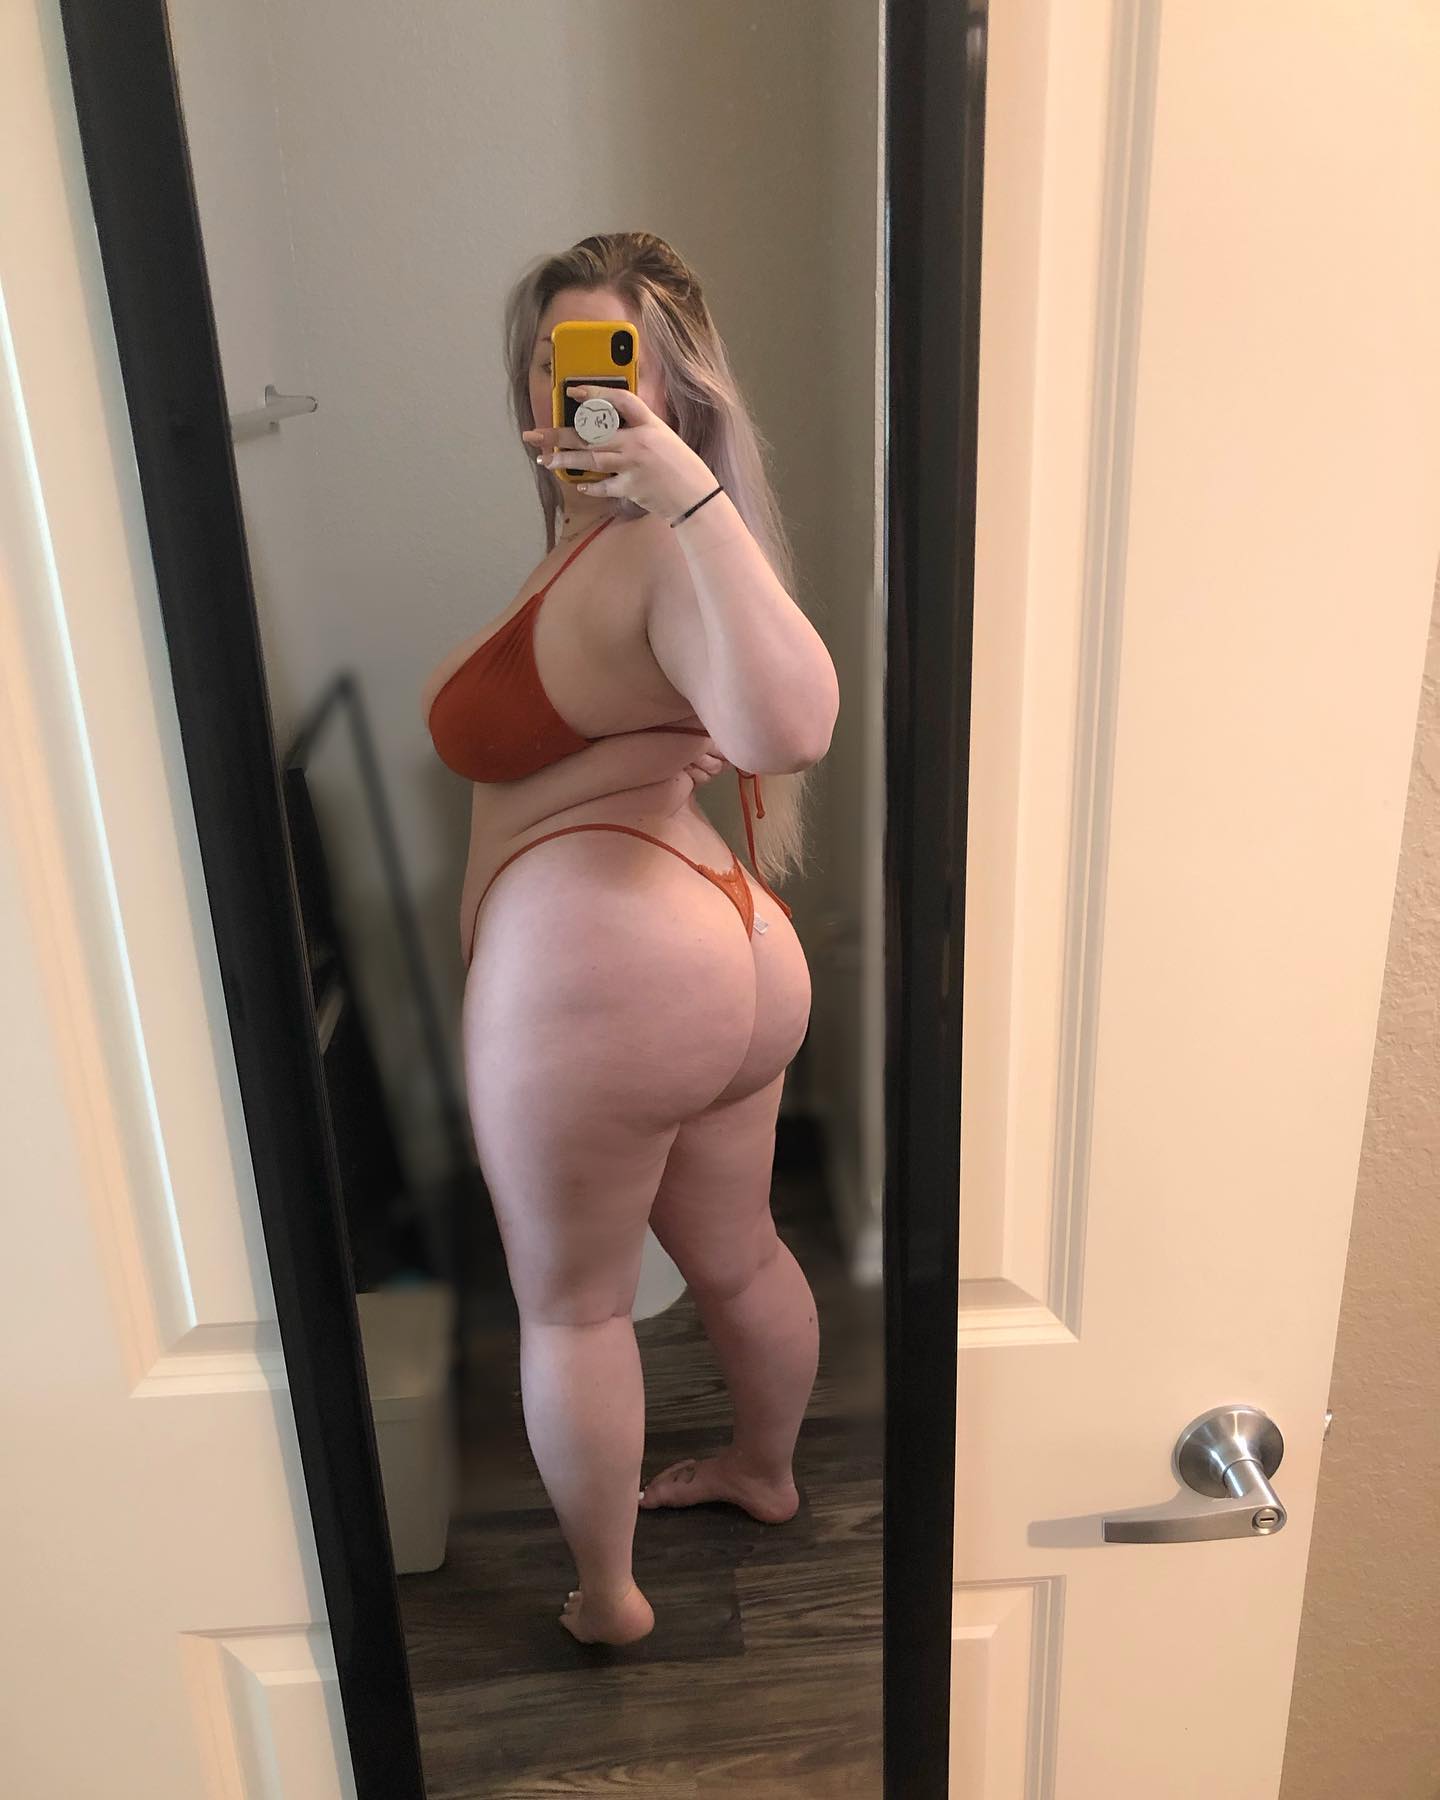 Are you coming over? 😈 Check out my Onlyfans sale in my bio 💦 
————————————————————————

#curves #curvy #curvygirl #thicc #thiccgirls #thickgirlproblems #thickwhitegirl #thickthighsprettyeyes #thickthighssaveslives #girl #tinybikinitops #explorepage #explore #explorepage✨ #plussize #plussizemodel #thickwomen #thickwhitegirl #curves #curvy #curvyblond #curvygirl #thicc #thiccgirls #thickgirlproblems #contentcreator #onlyfans #reddit #thickwomen #plussize #beauty #naturalcurves #hourglassbody #fans #baddie #fansonly #spicyaccountant